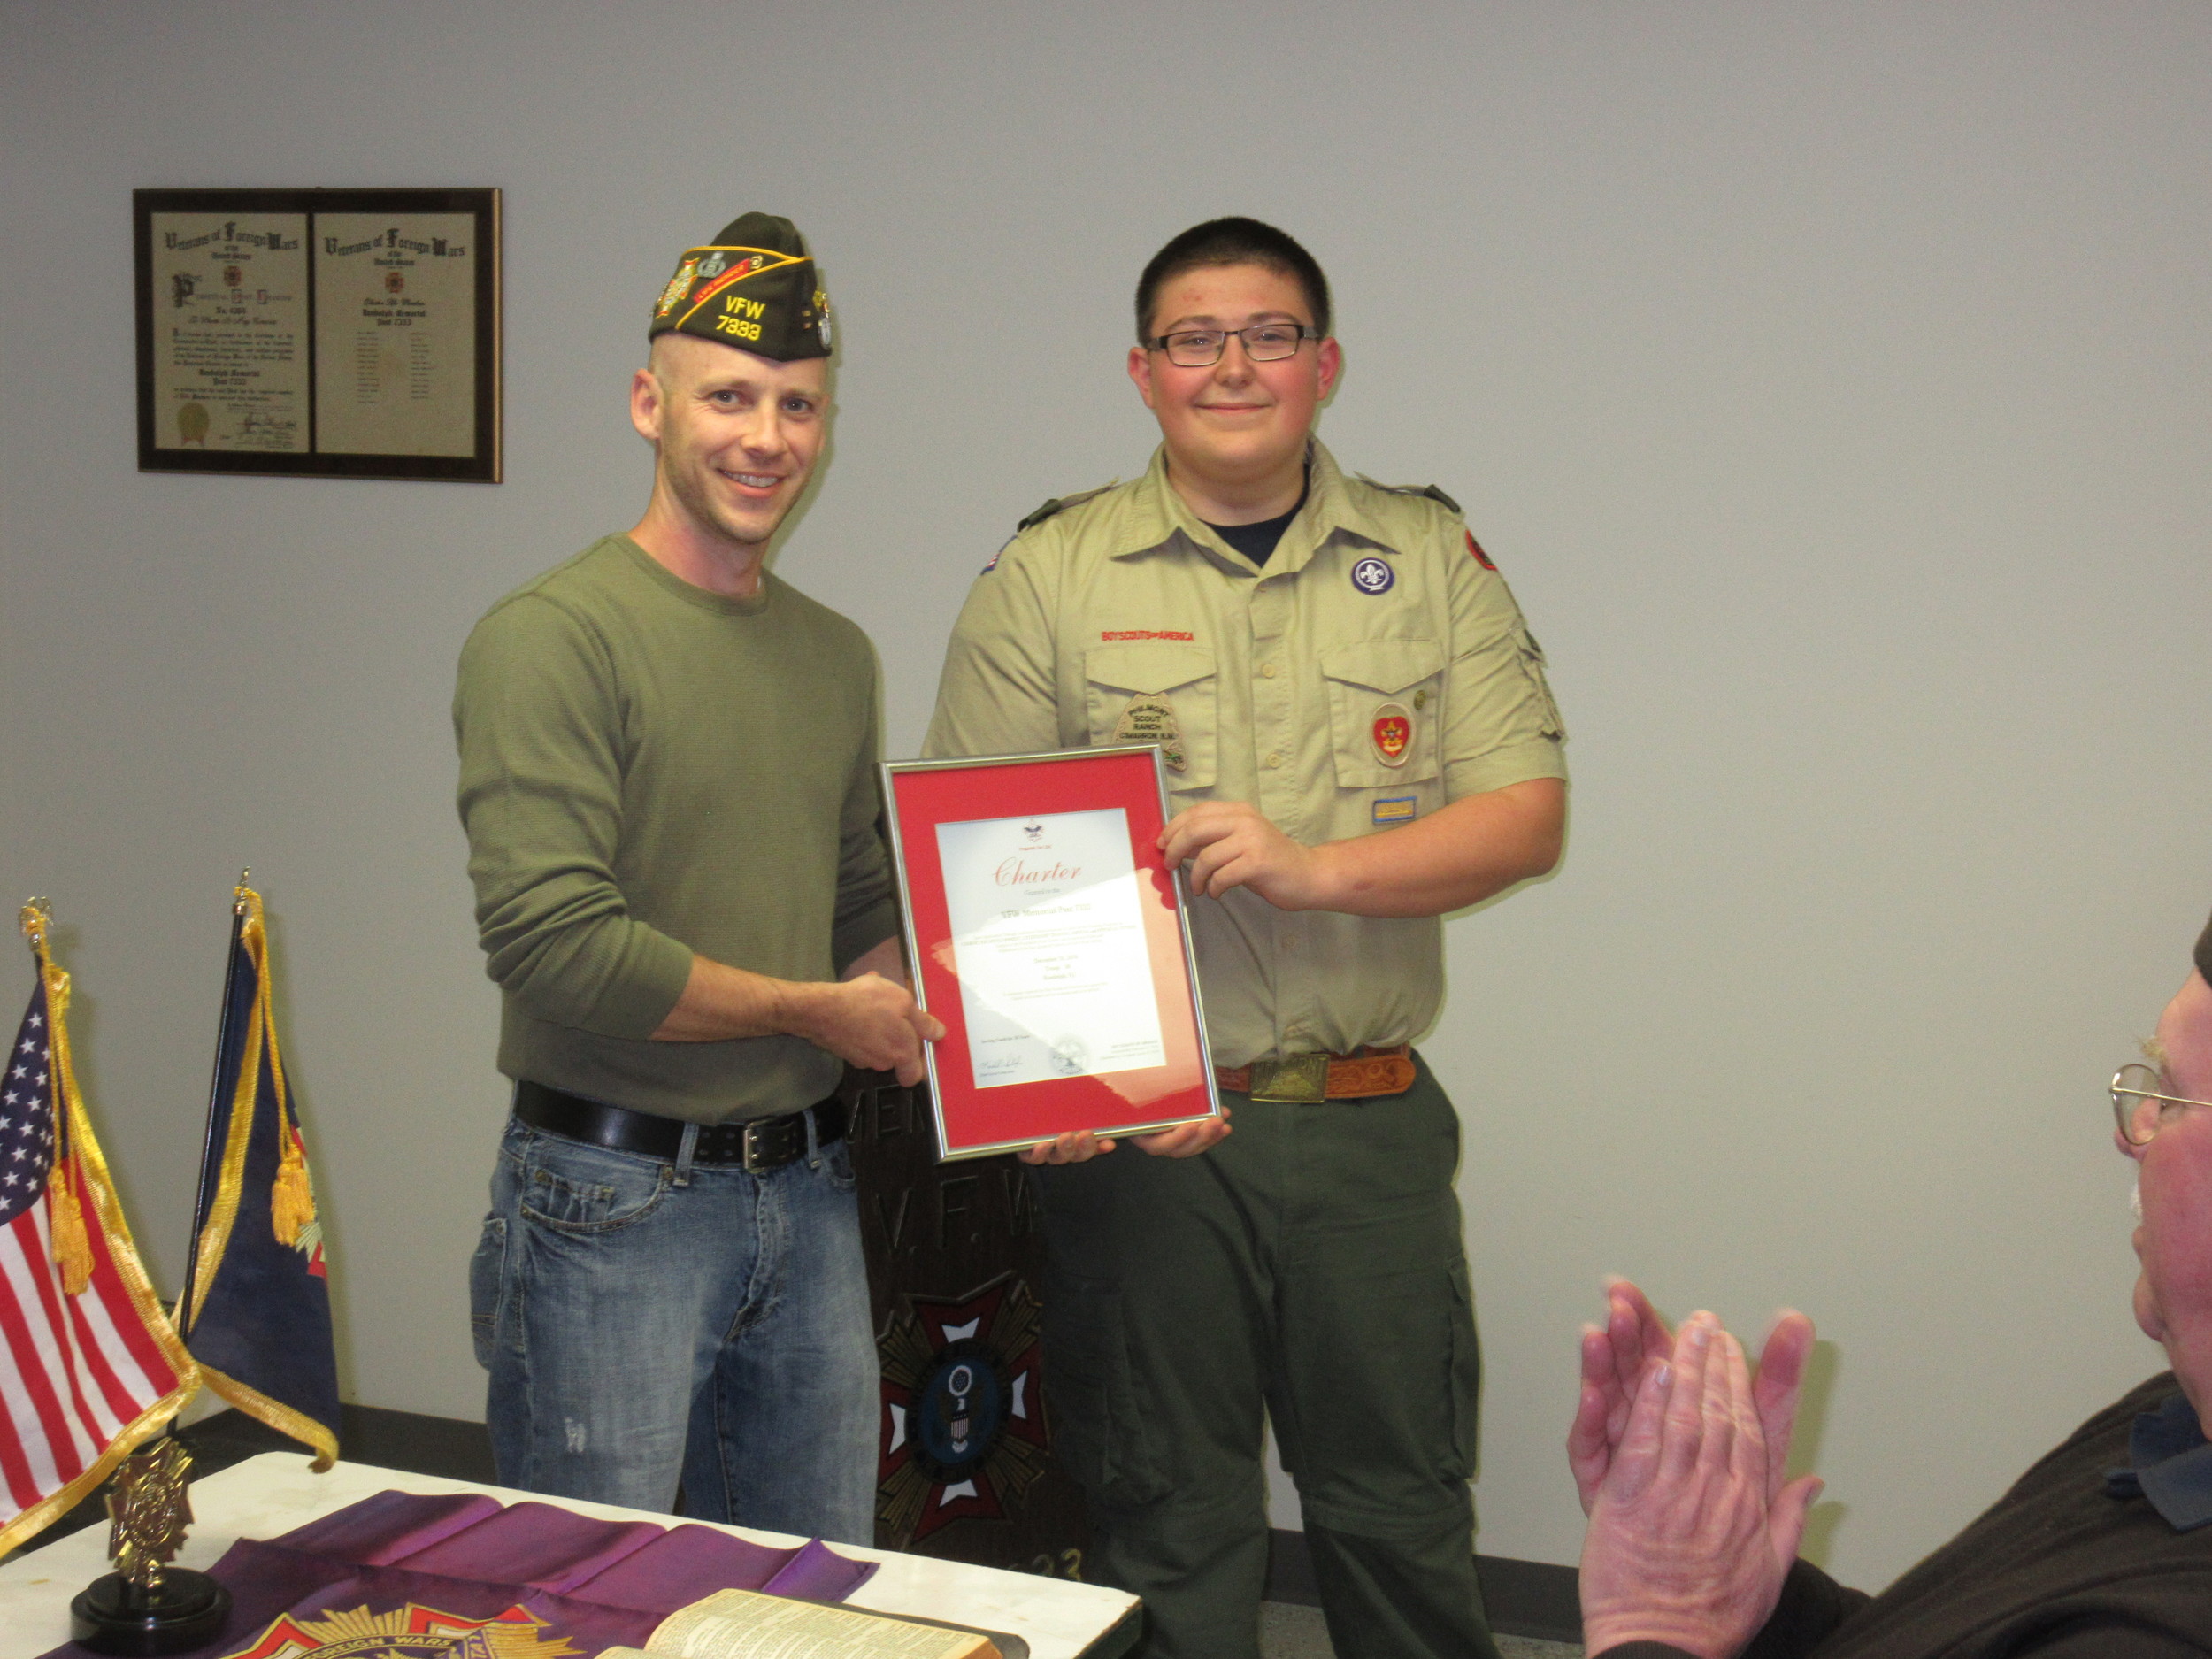  Senior Patrol Leader Joey Celentano &nbsp;presented the 2016 Boy Scout Troop 50 Charter to VFW Post 7333 Commander Scott Montanio on March 15. &nbsp;VFW Post 7333 has sponsored Troop 50 for the past 30 years. 